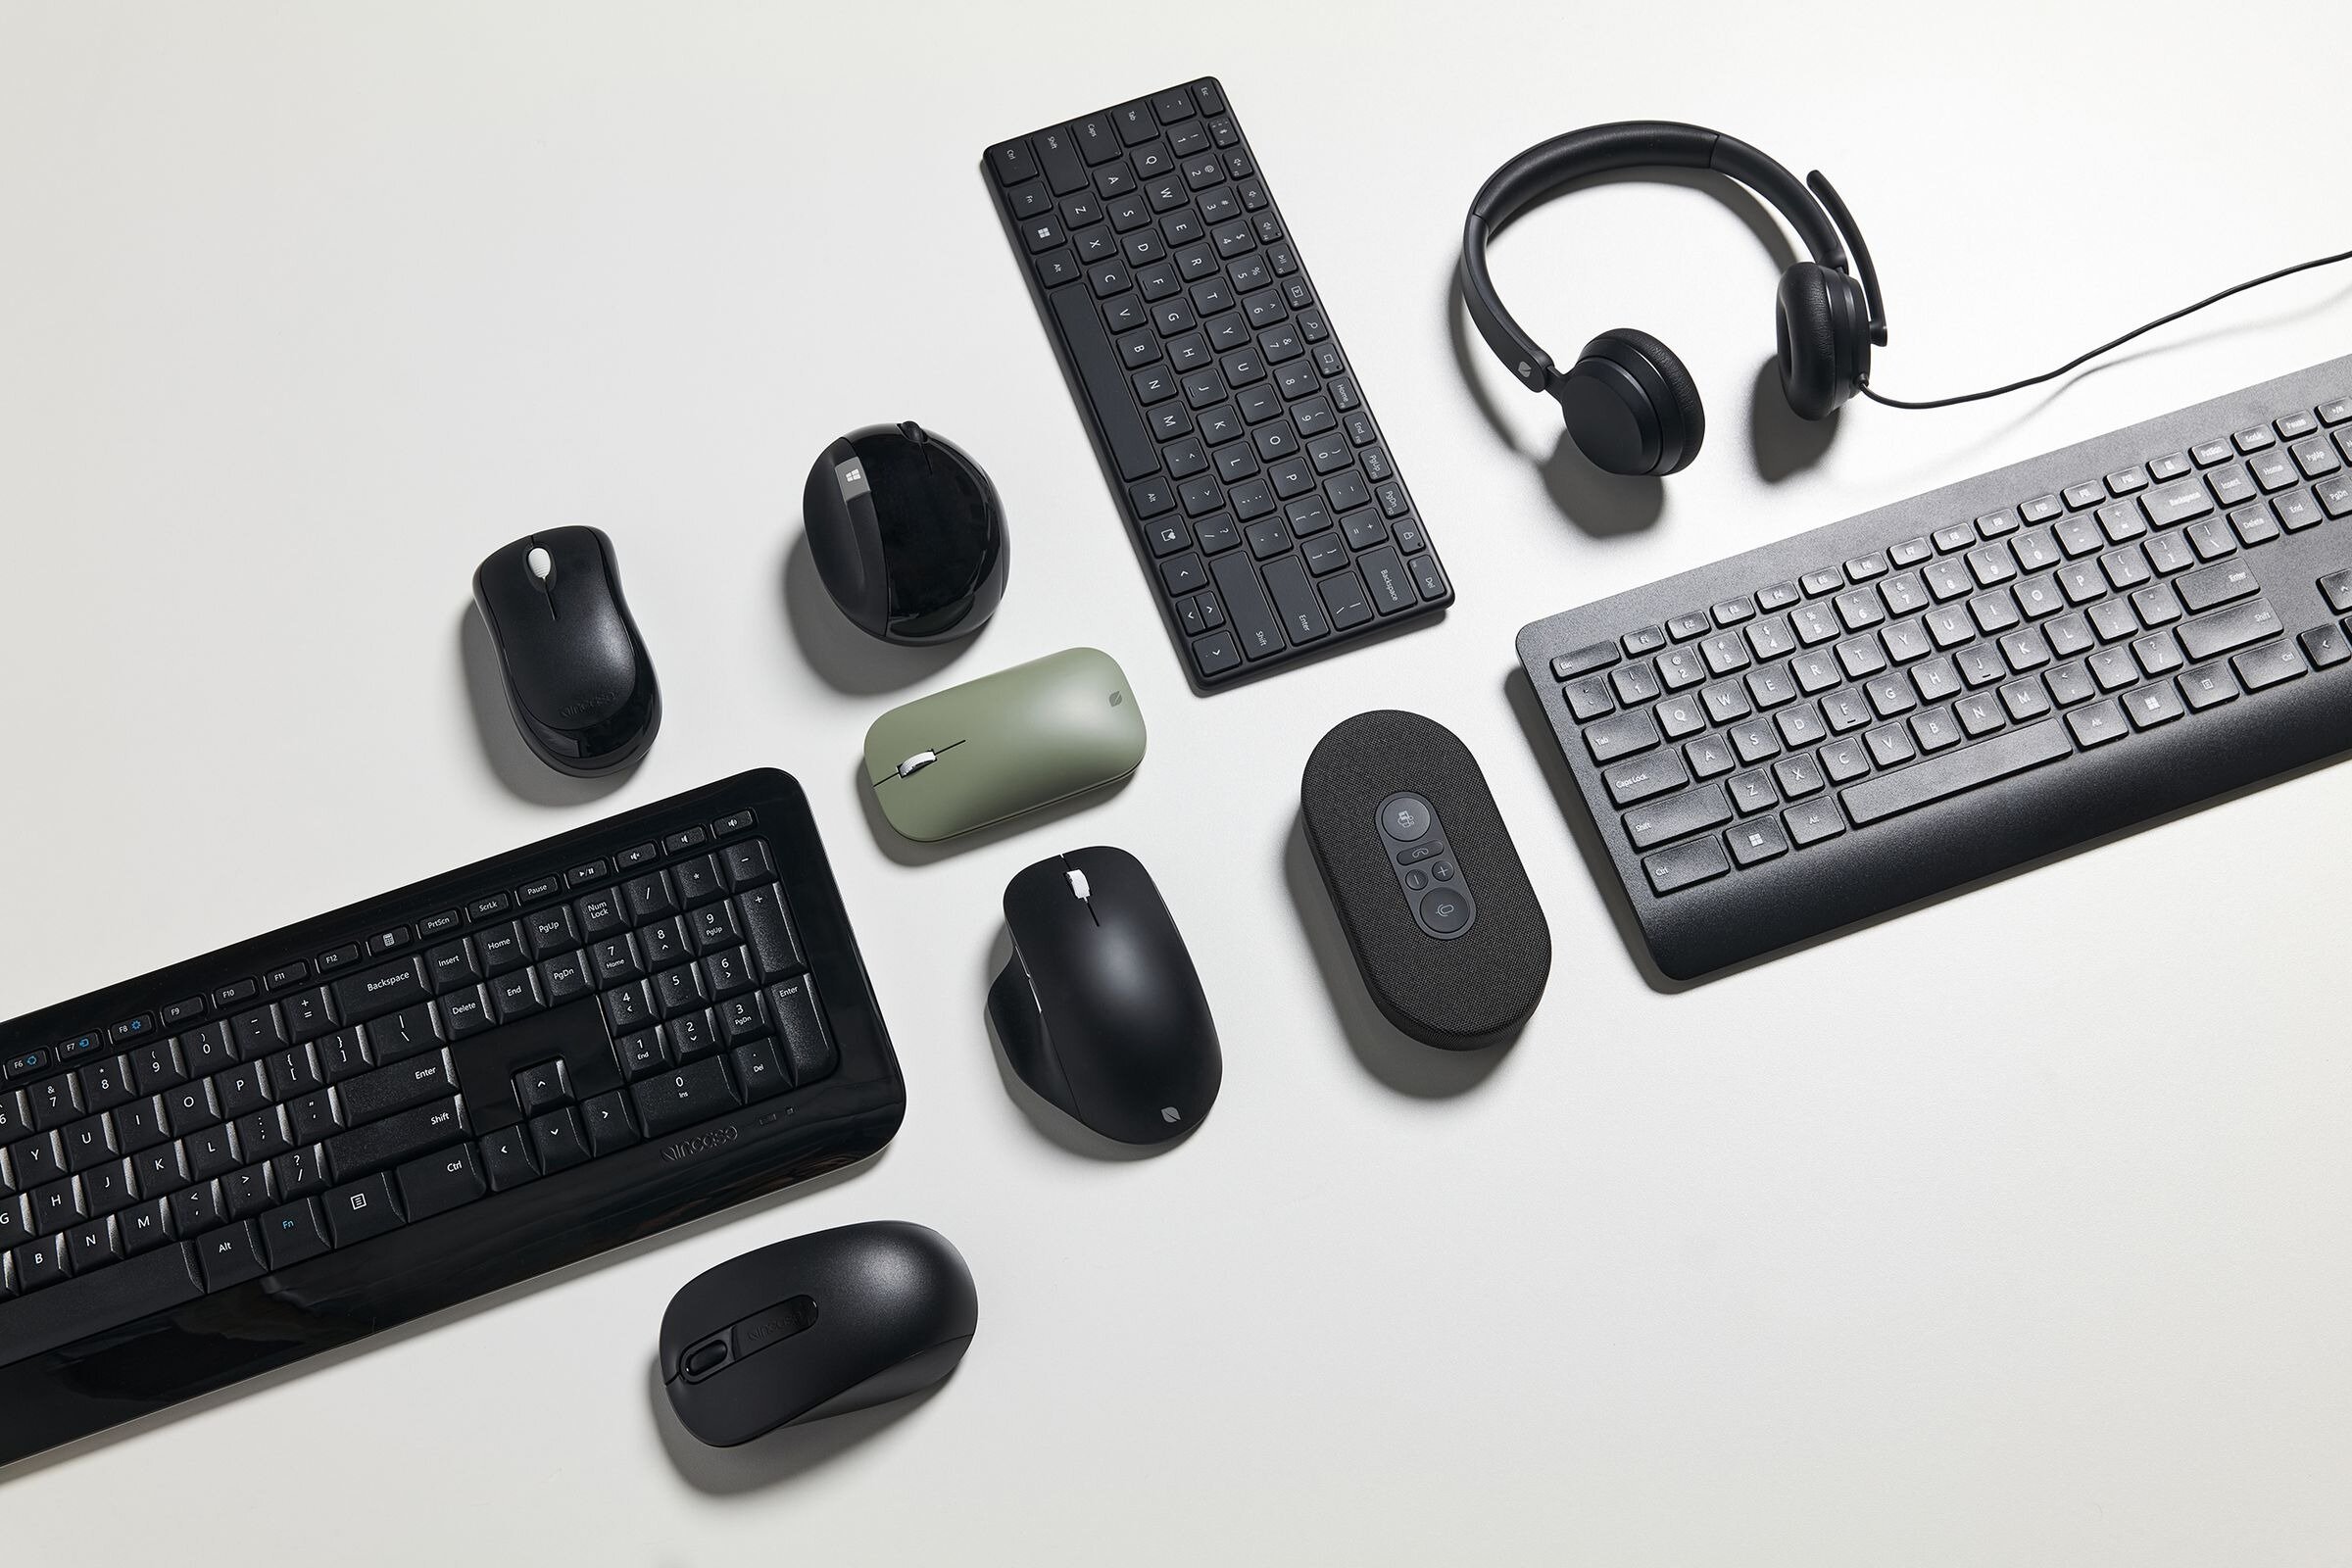 Microsoft keyboards and mice will continue to be available in a unique partnership with Incase – Microsoft